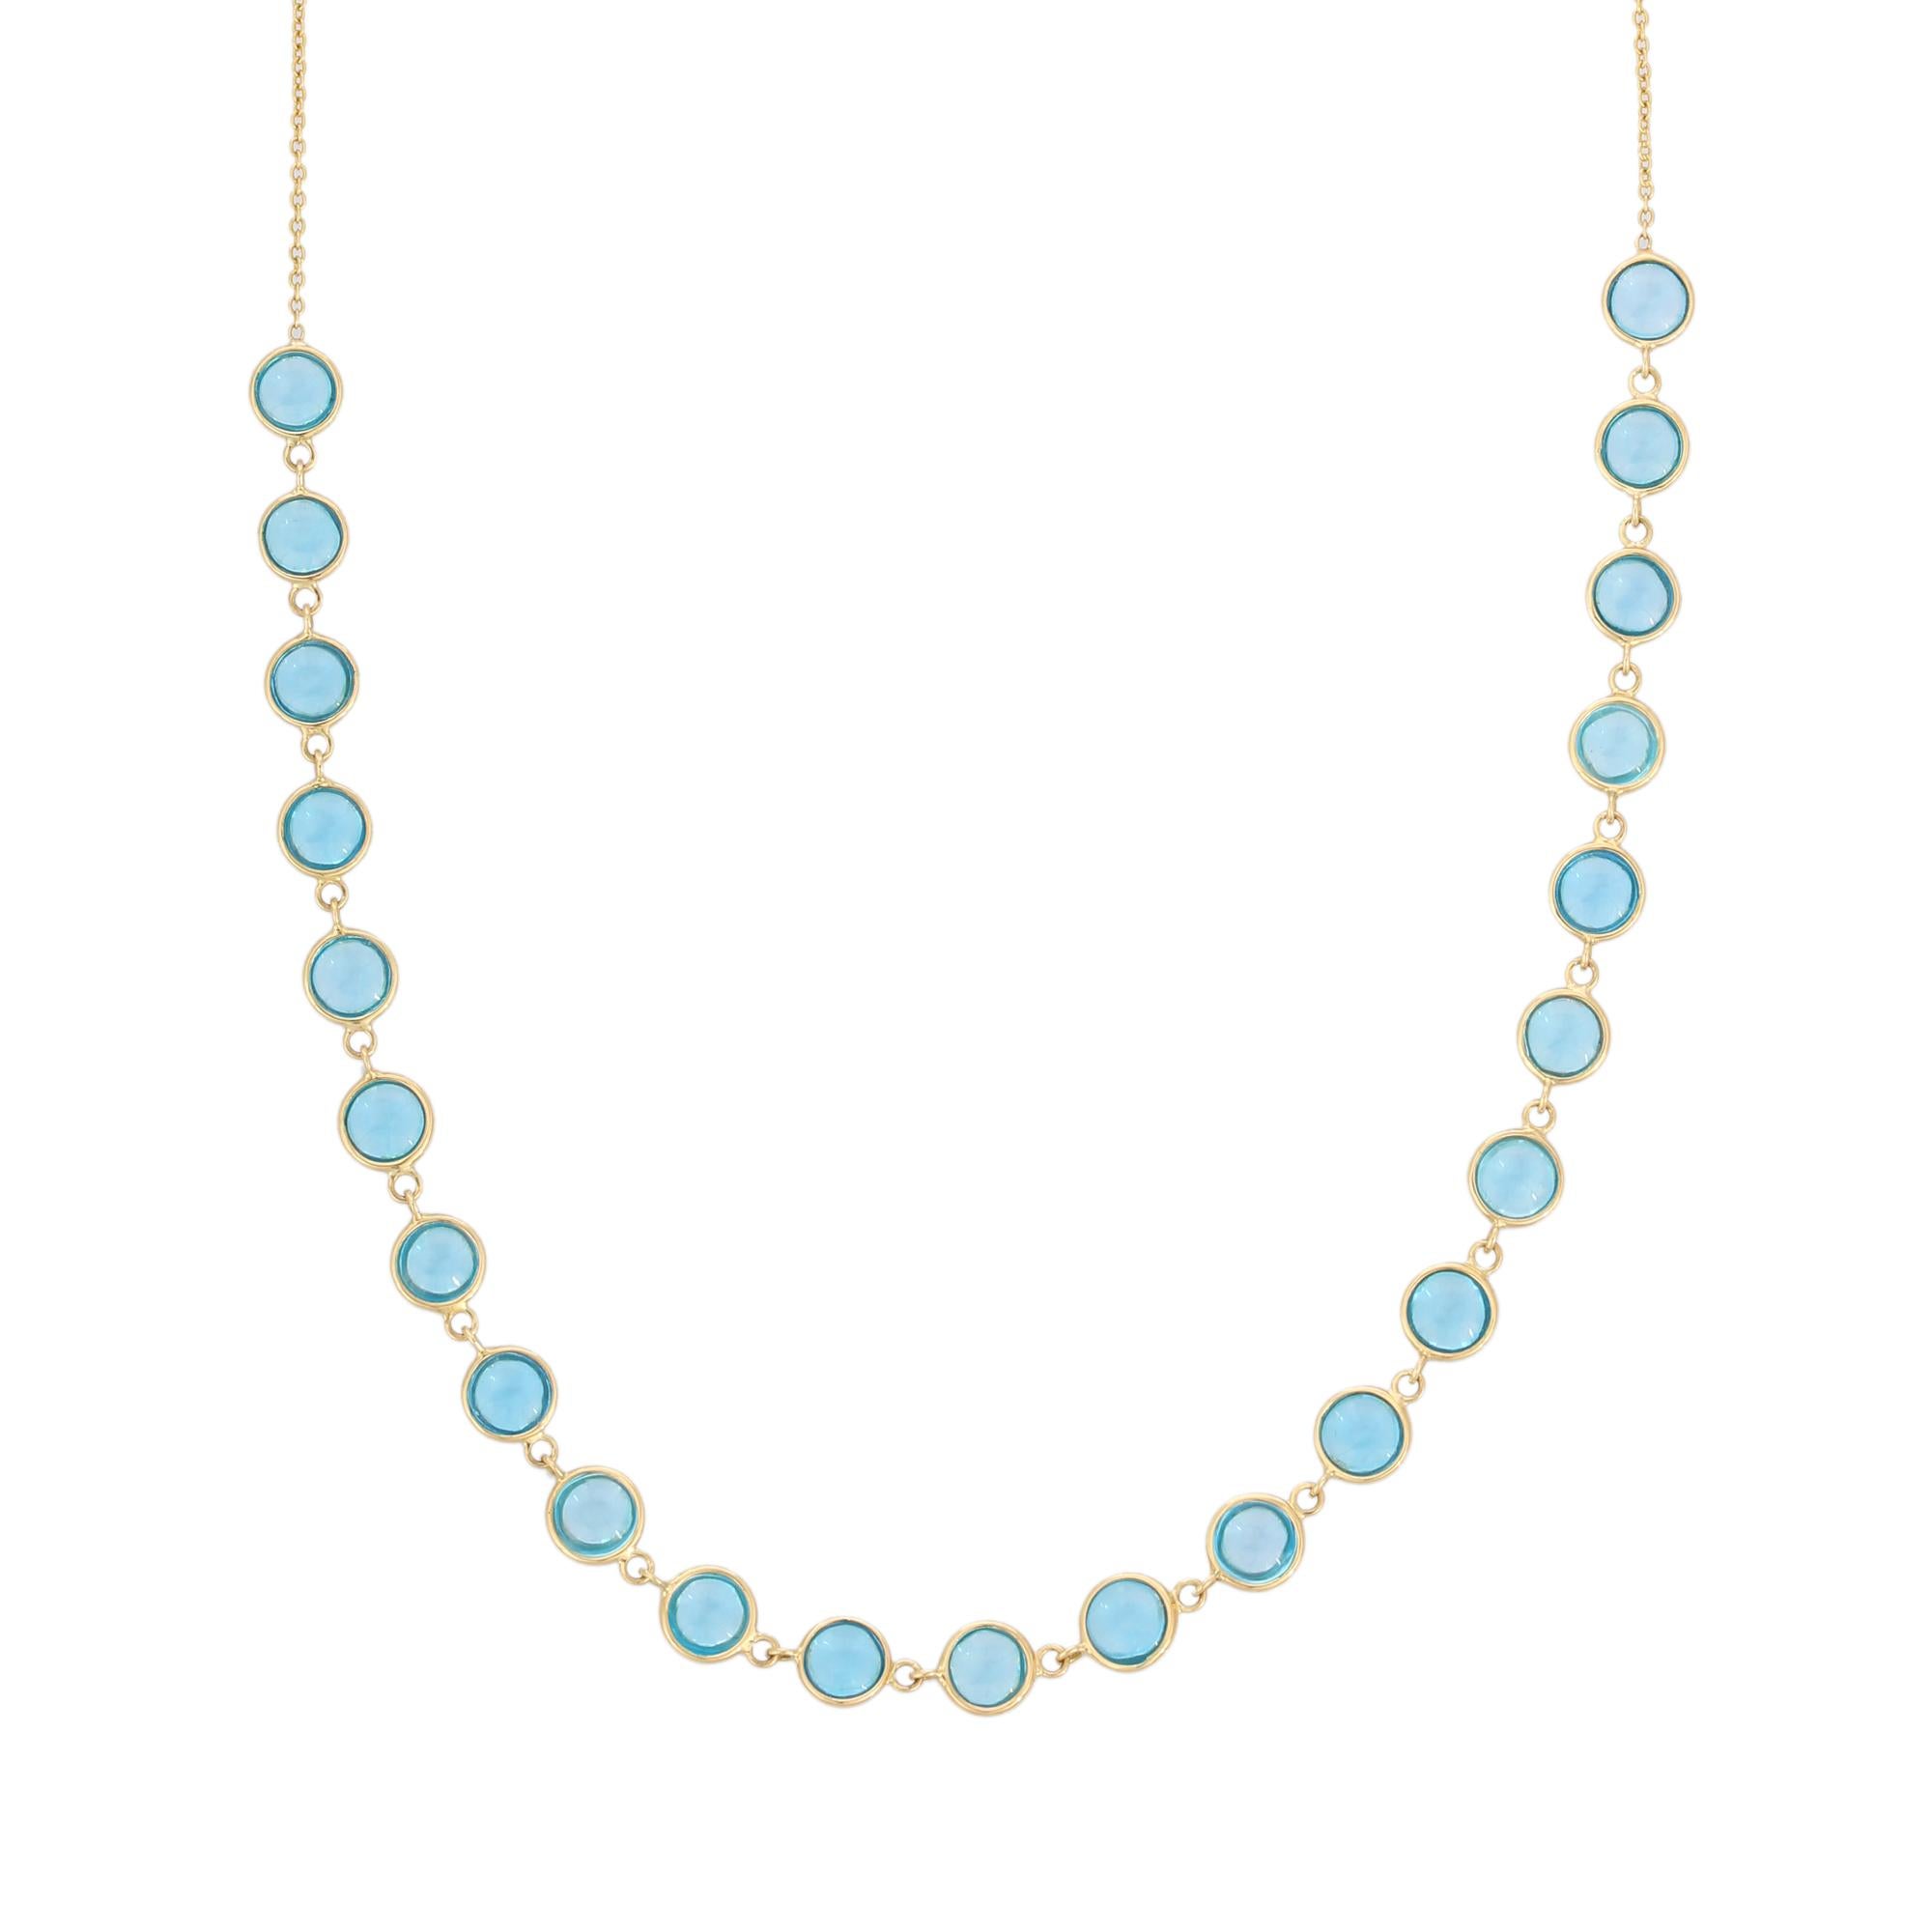 Blue Topaz Necklace in 18K Gold studded with round cut topaz pieces.
Accessorize your look with this elegant blue topaz beaded necklace. This stunning piece of jewelry instantly elevates a casual look or dressy outfit. Comfortable and easy to wear,